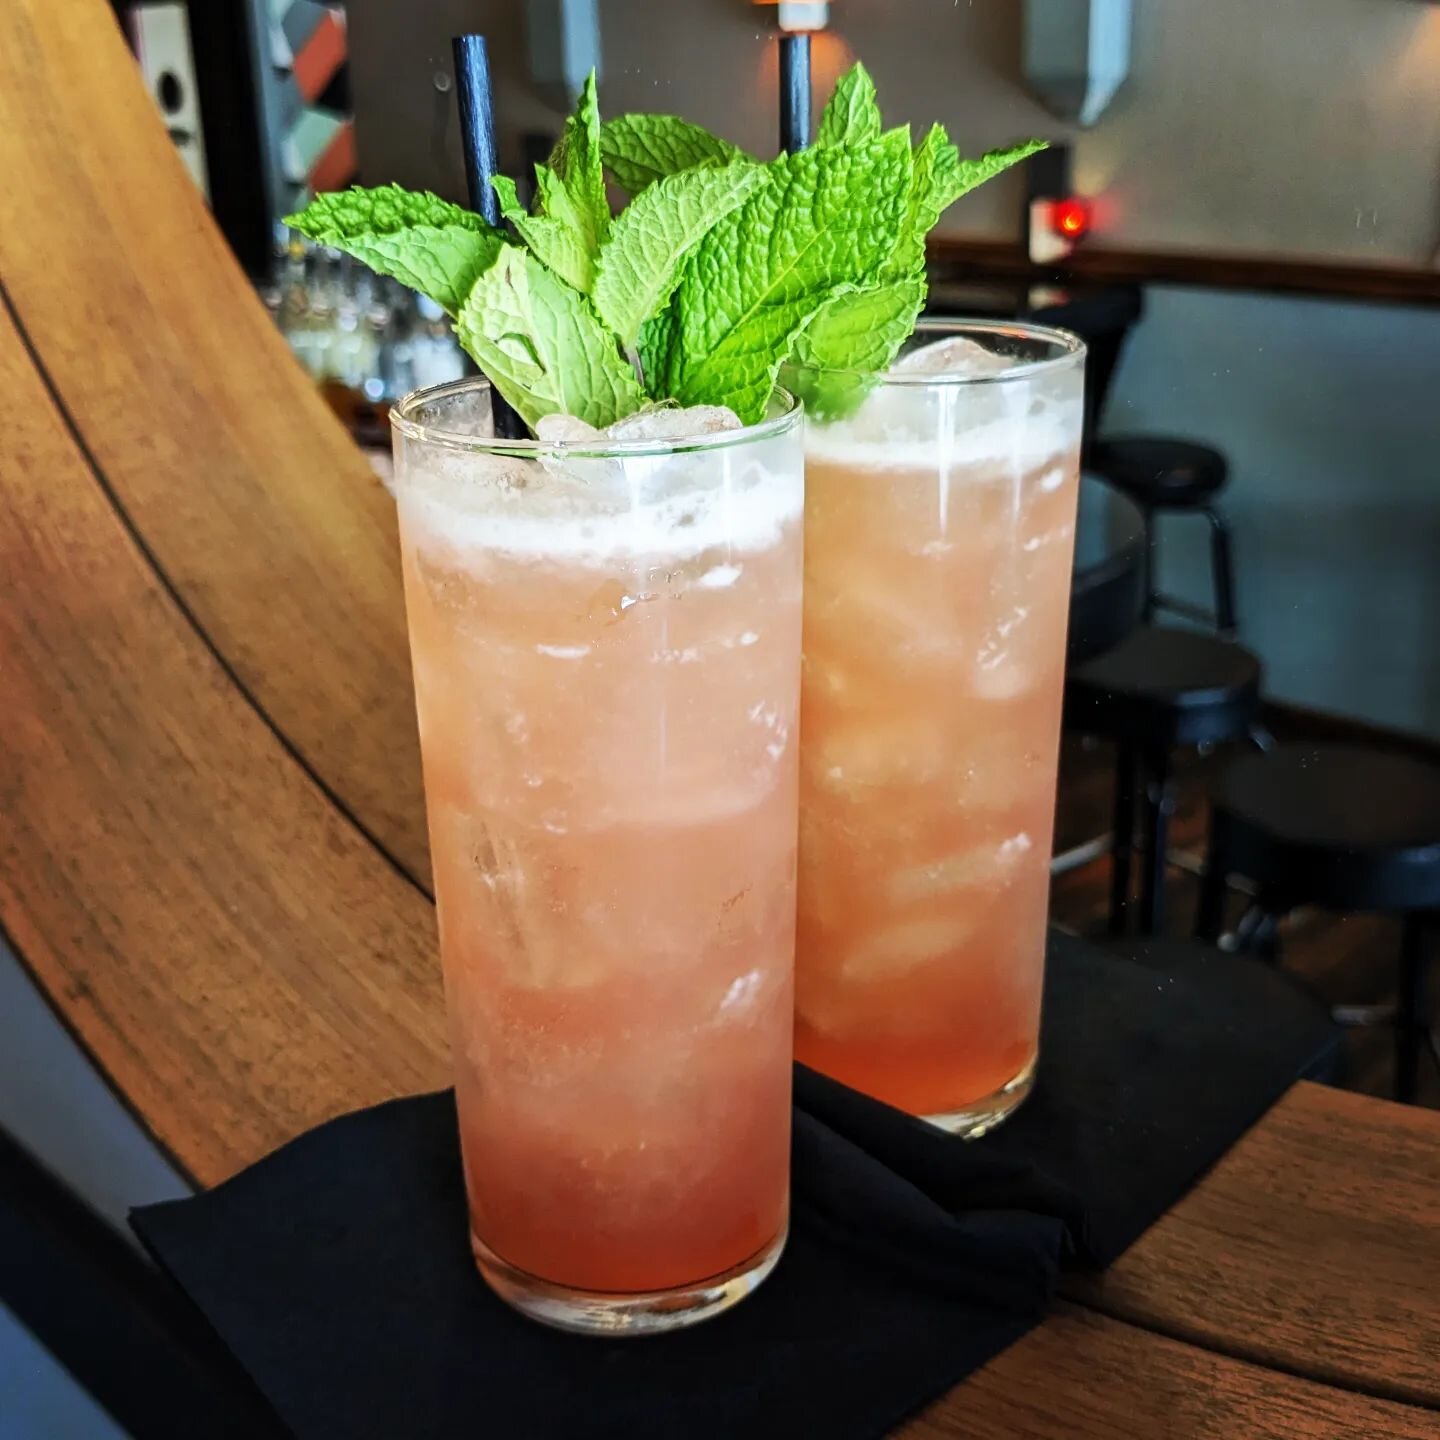 It is $10 Tuesday! Explore the heavens with a &quot;Moon Lander,&quot; featuring Hendrick's Gin, Greenbar Hibiscus Liqueur, Blended Family No. 17 Triple Sec, lime juice, and Scrappy's Grapefruit Bitters. Bright, refreshing and floral, this springtime